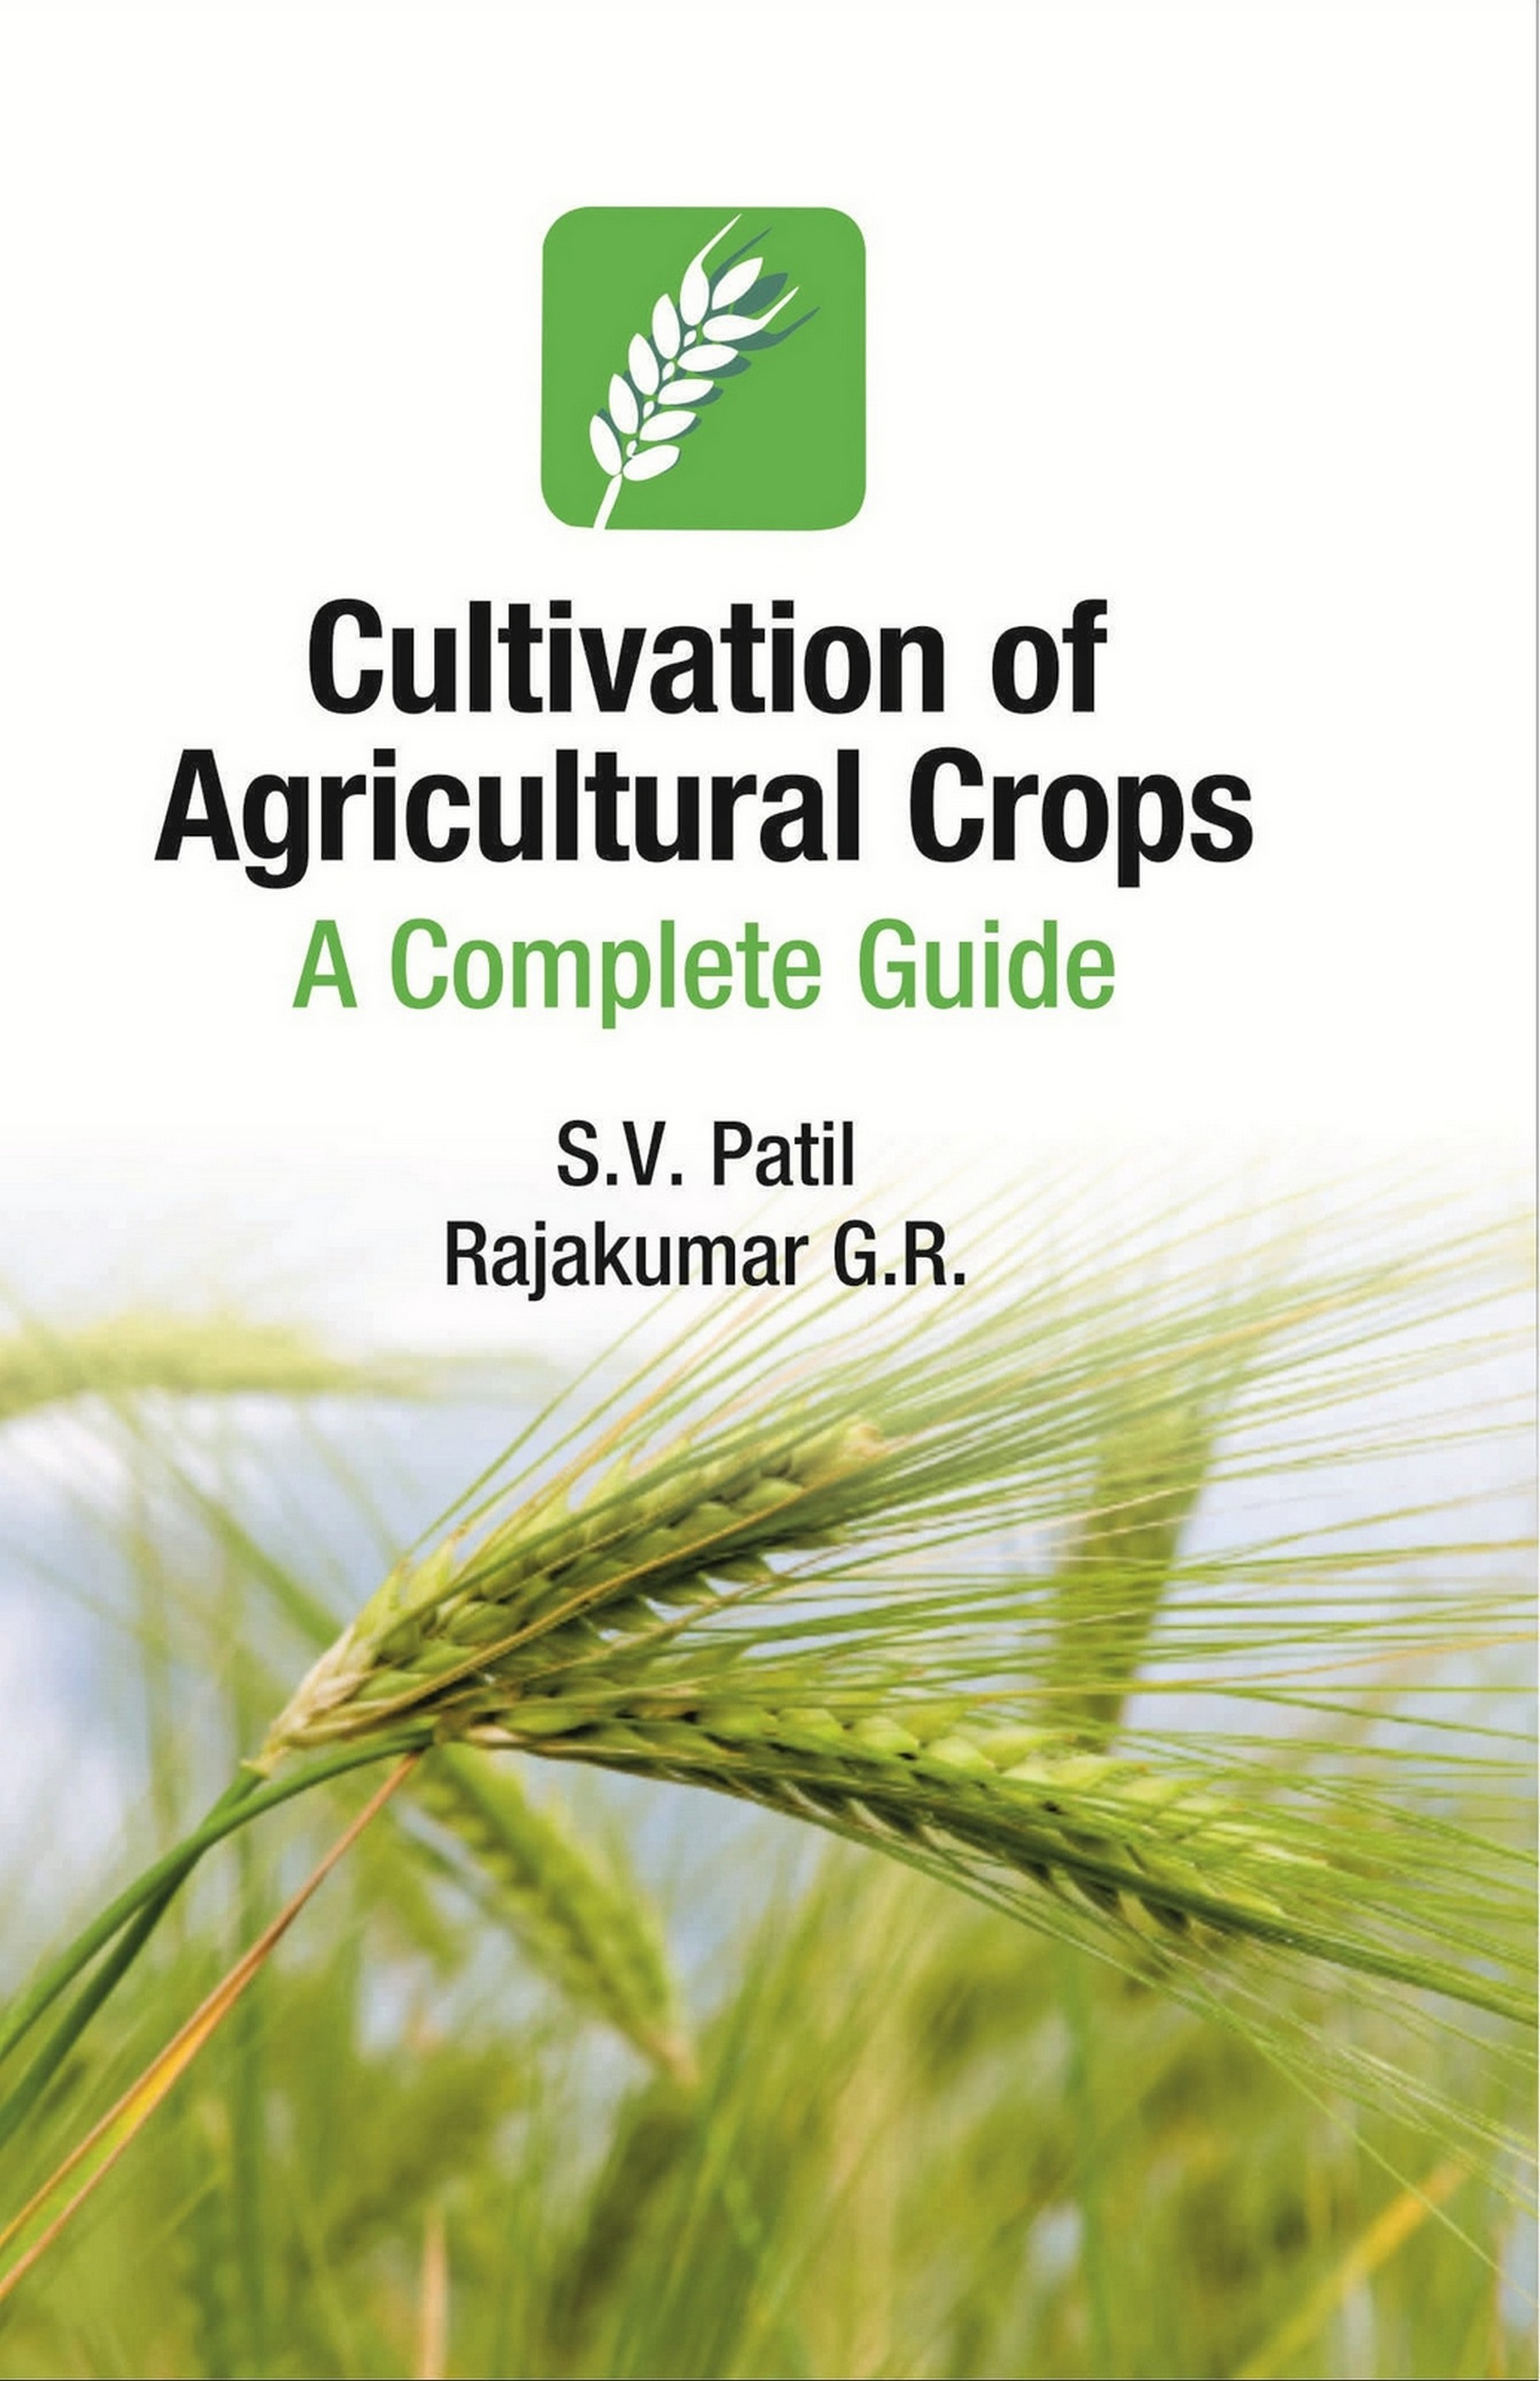 Cultivation of Agricultural Crops